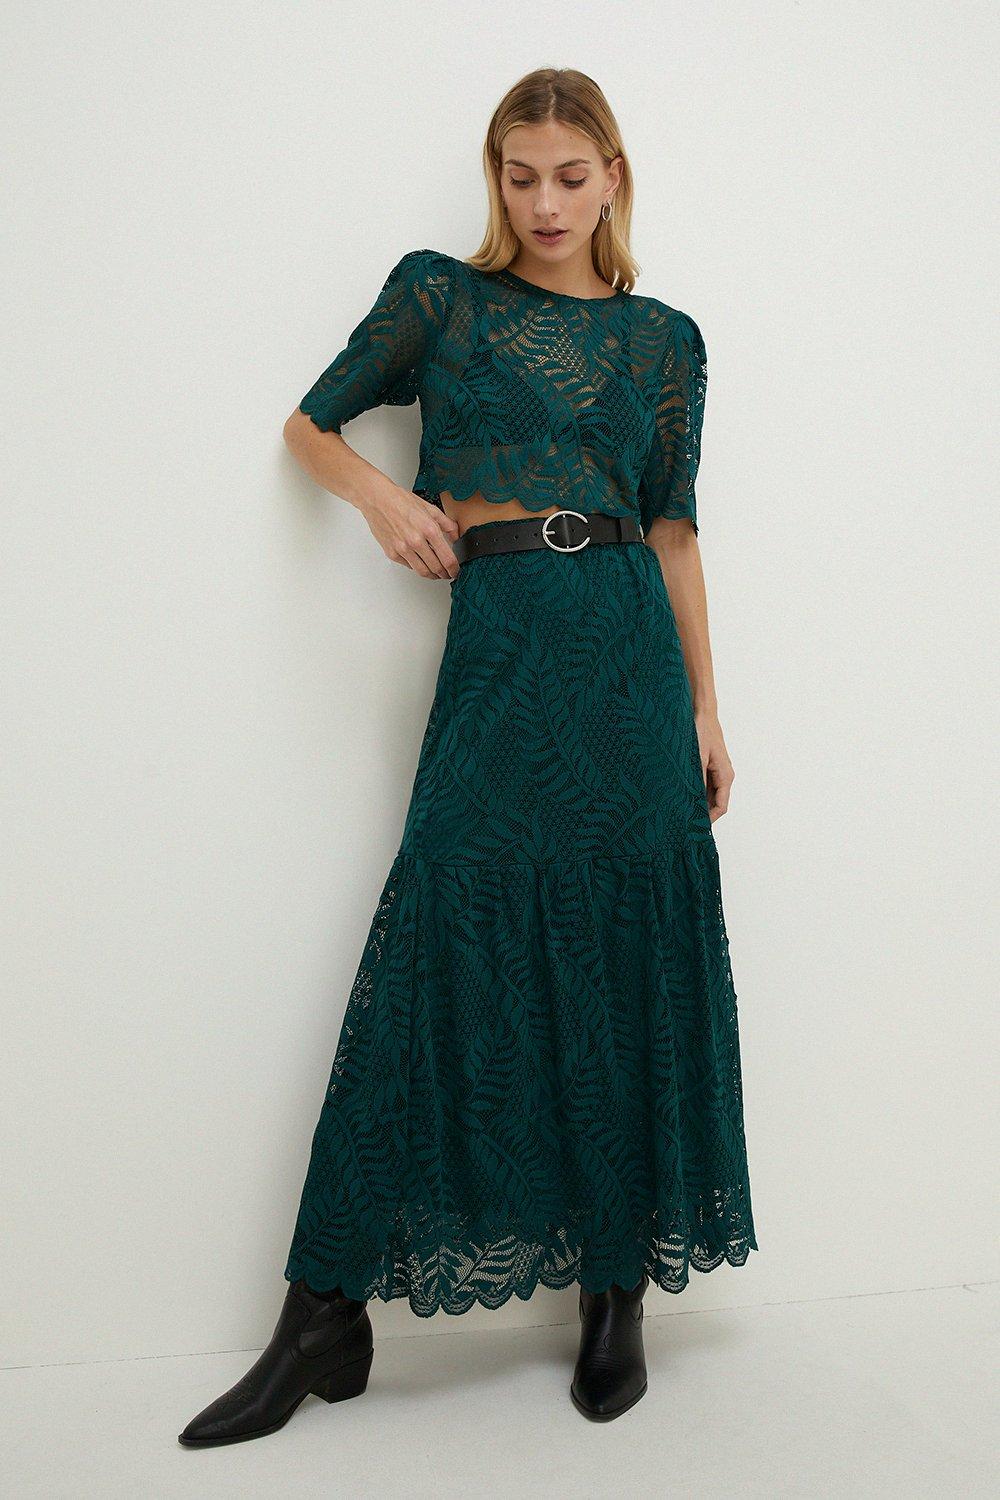 Lace Scalloped Hem Tiered Skirt Co-orddark green